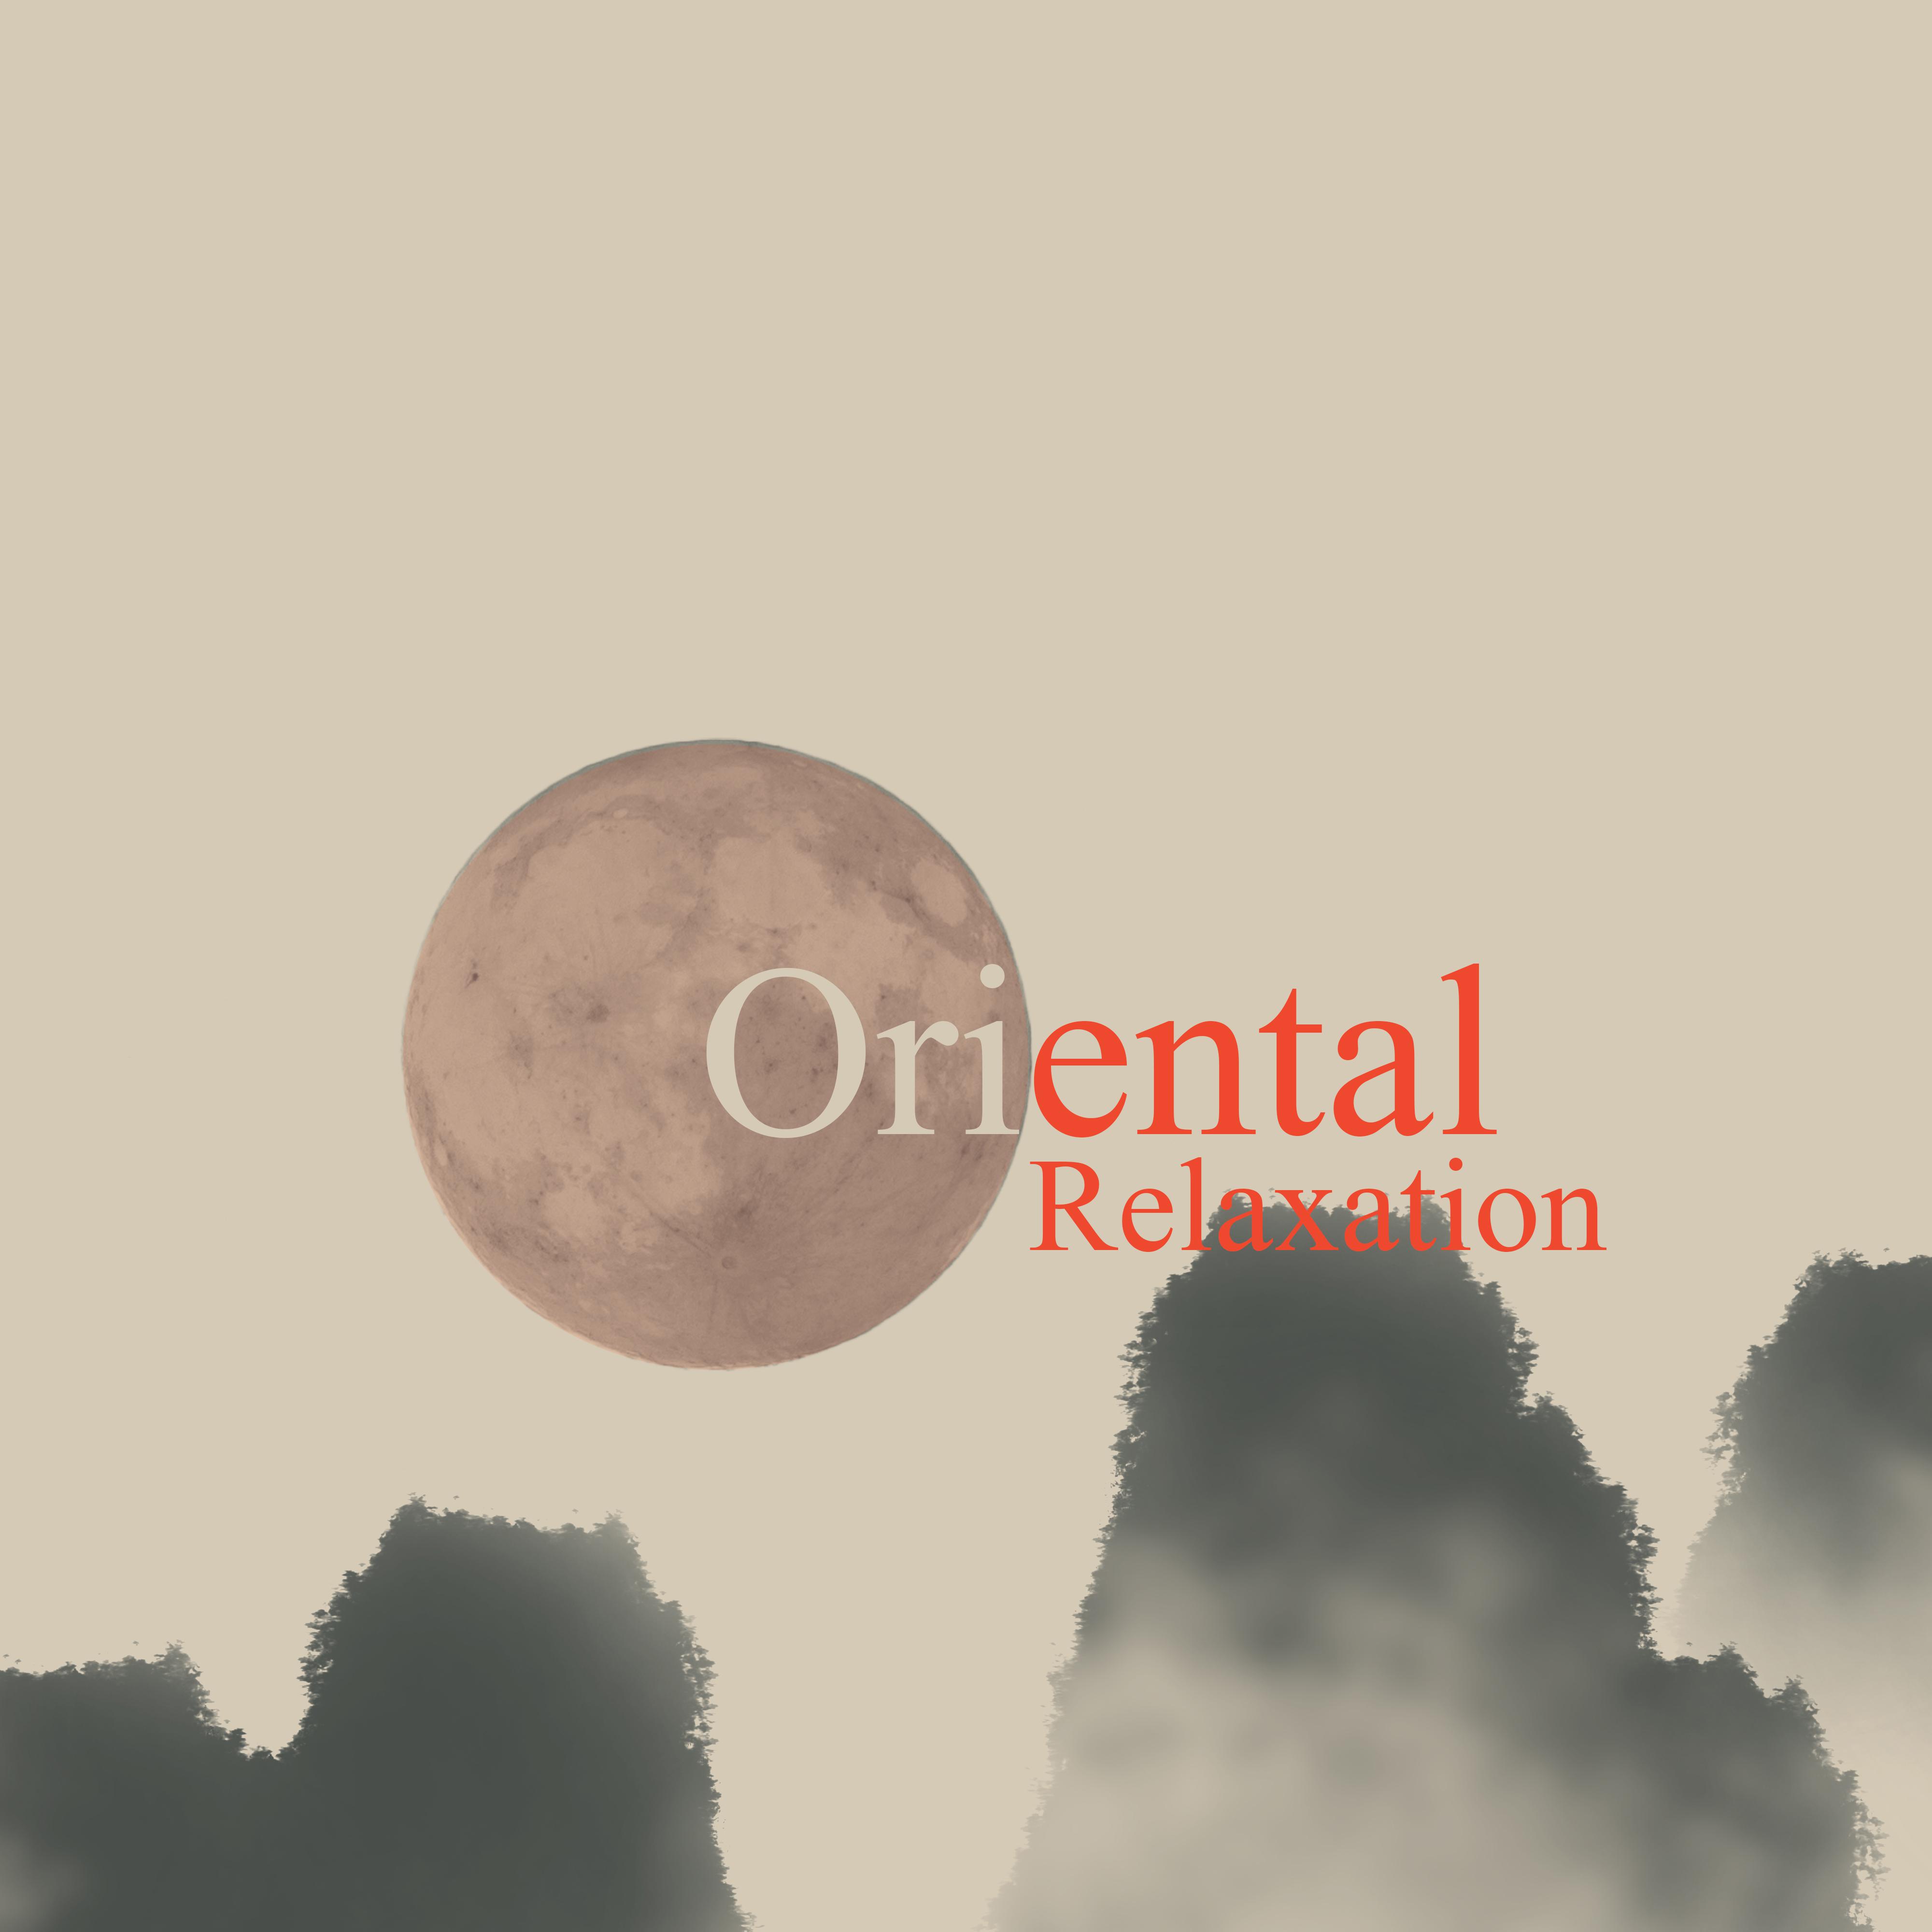 Oriental Relaxation: Asian Instrumental Music for Relaxation, Rest, Stress Relief, Relaxation, Spa, Massage, Meditation, Aromatherapy, Zen, Yoga and Therapy